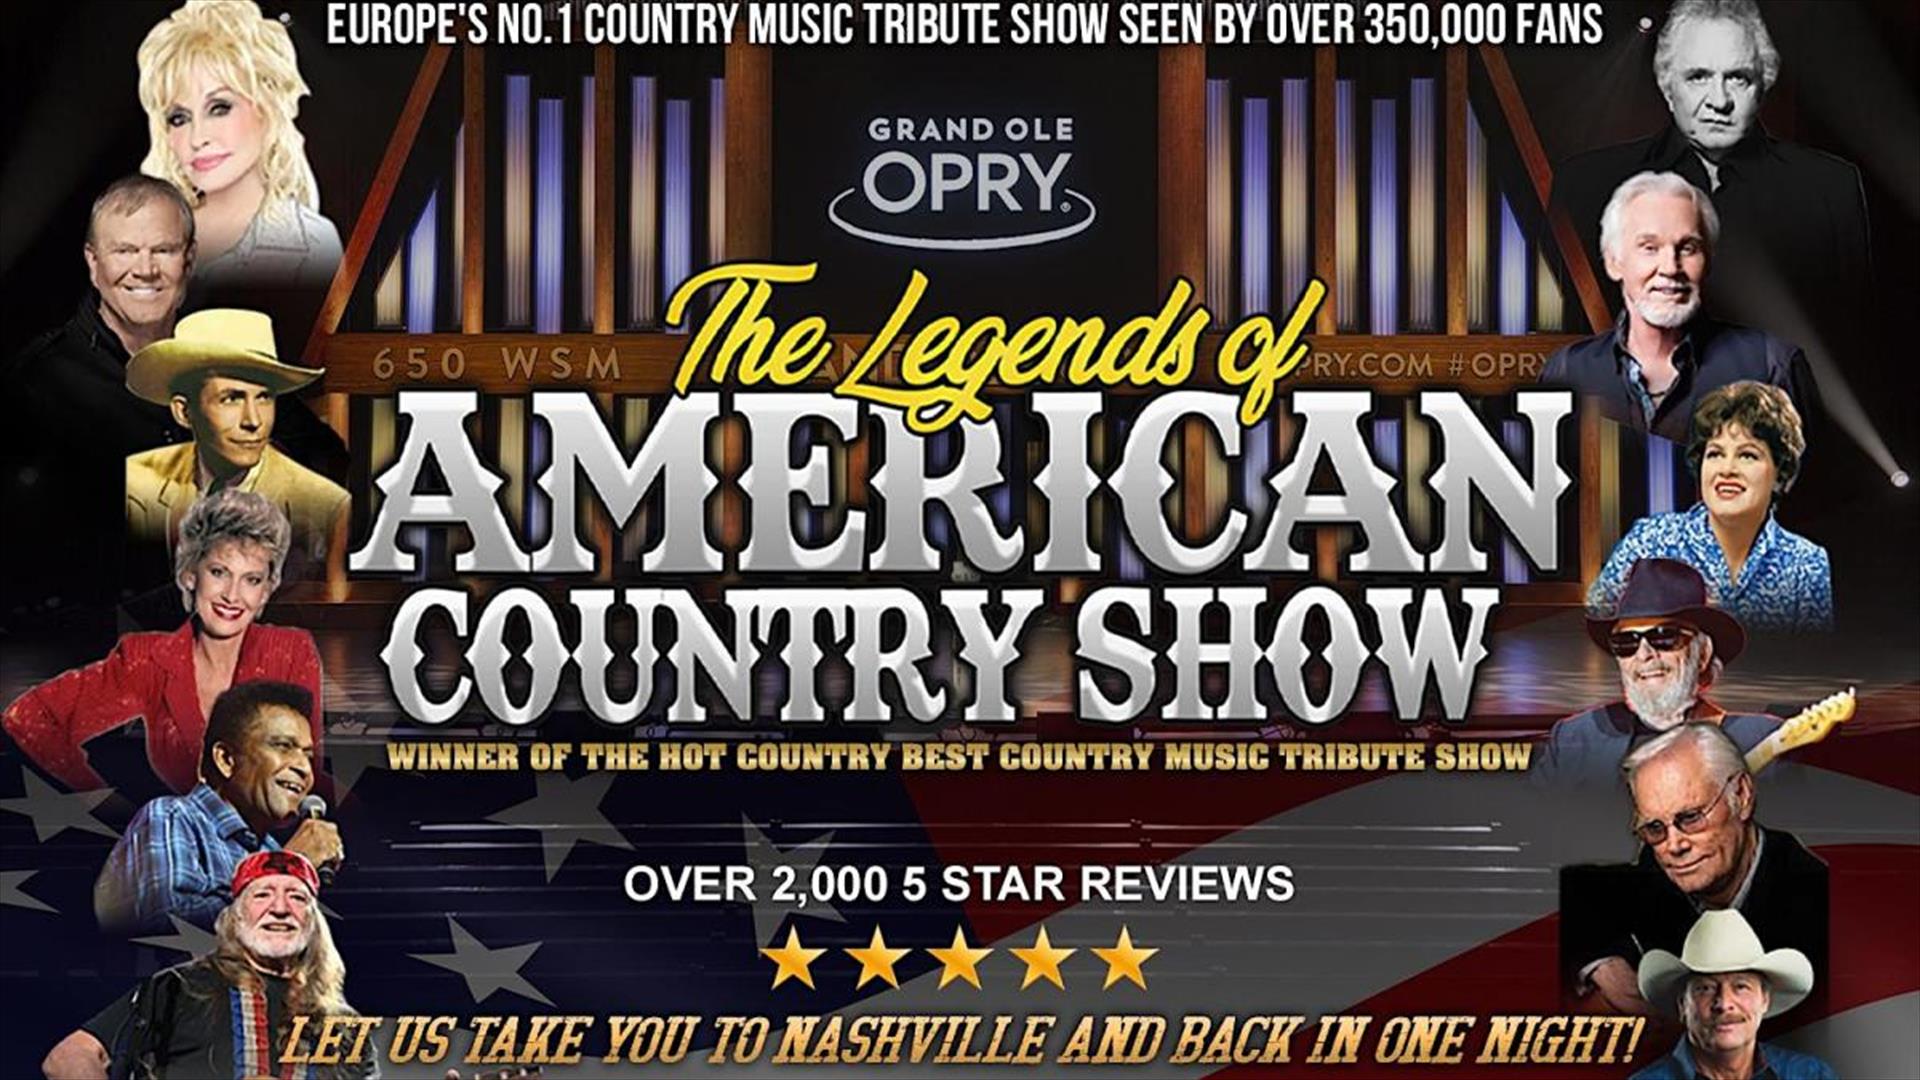 Legends of American Country Tribute Concert